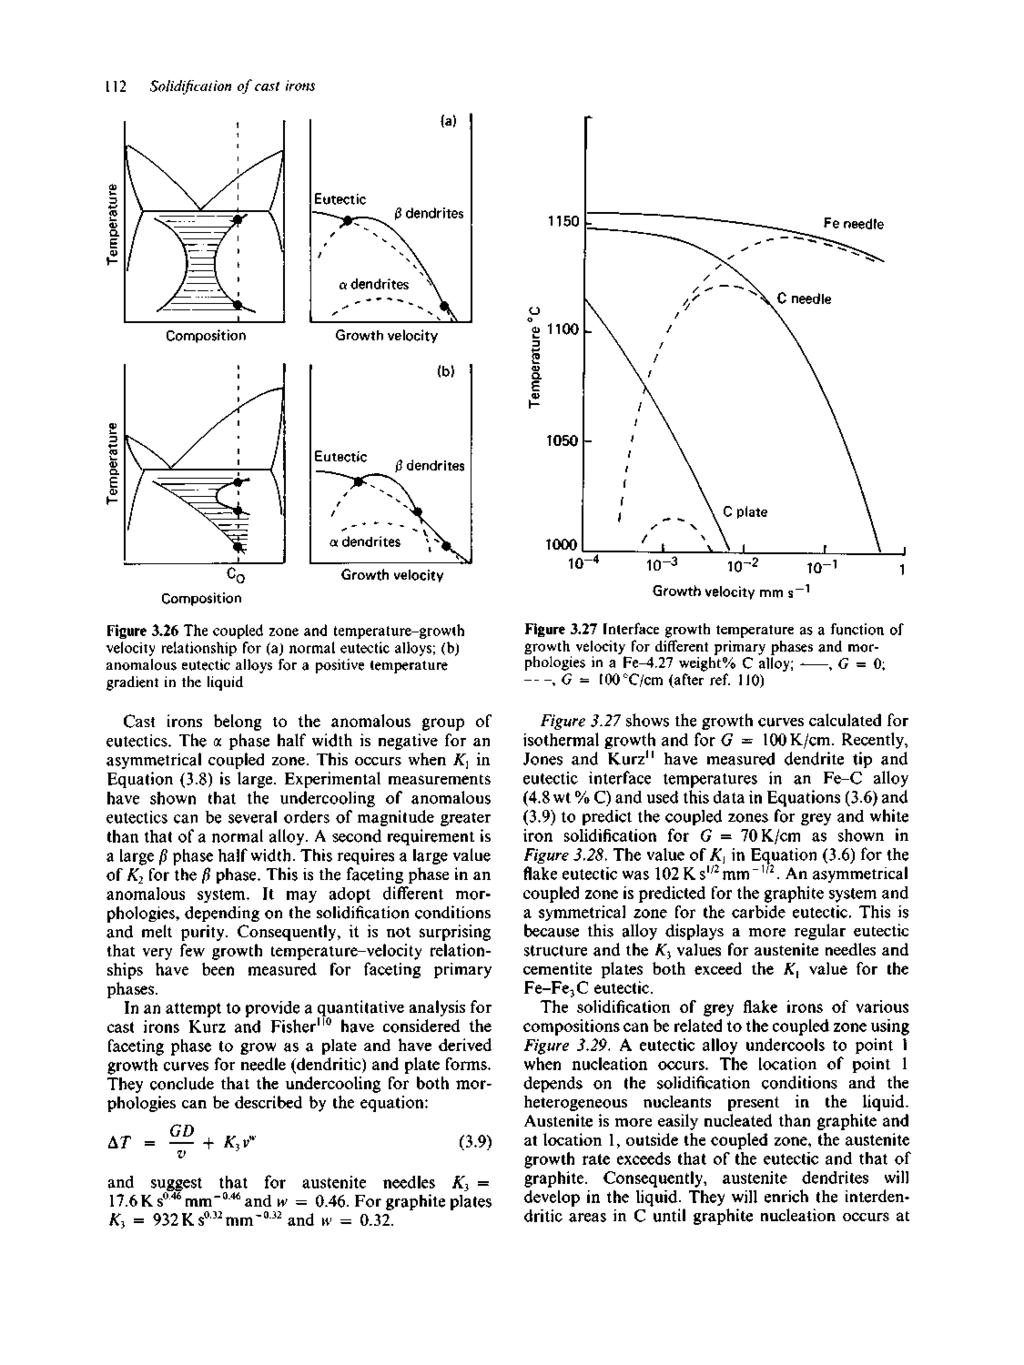 112 Solidification of cast irons Fe needle Composition Growth velocity (b) Eutectic ß dendrites Composition adendrites \^L Growth velocity Figure 3.